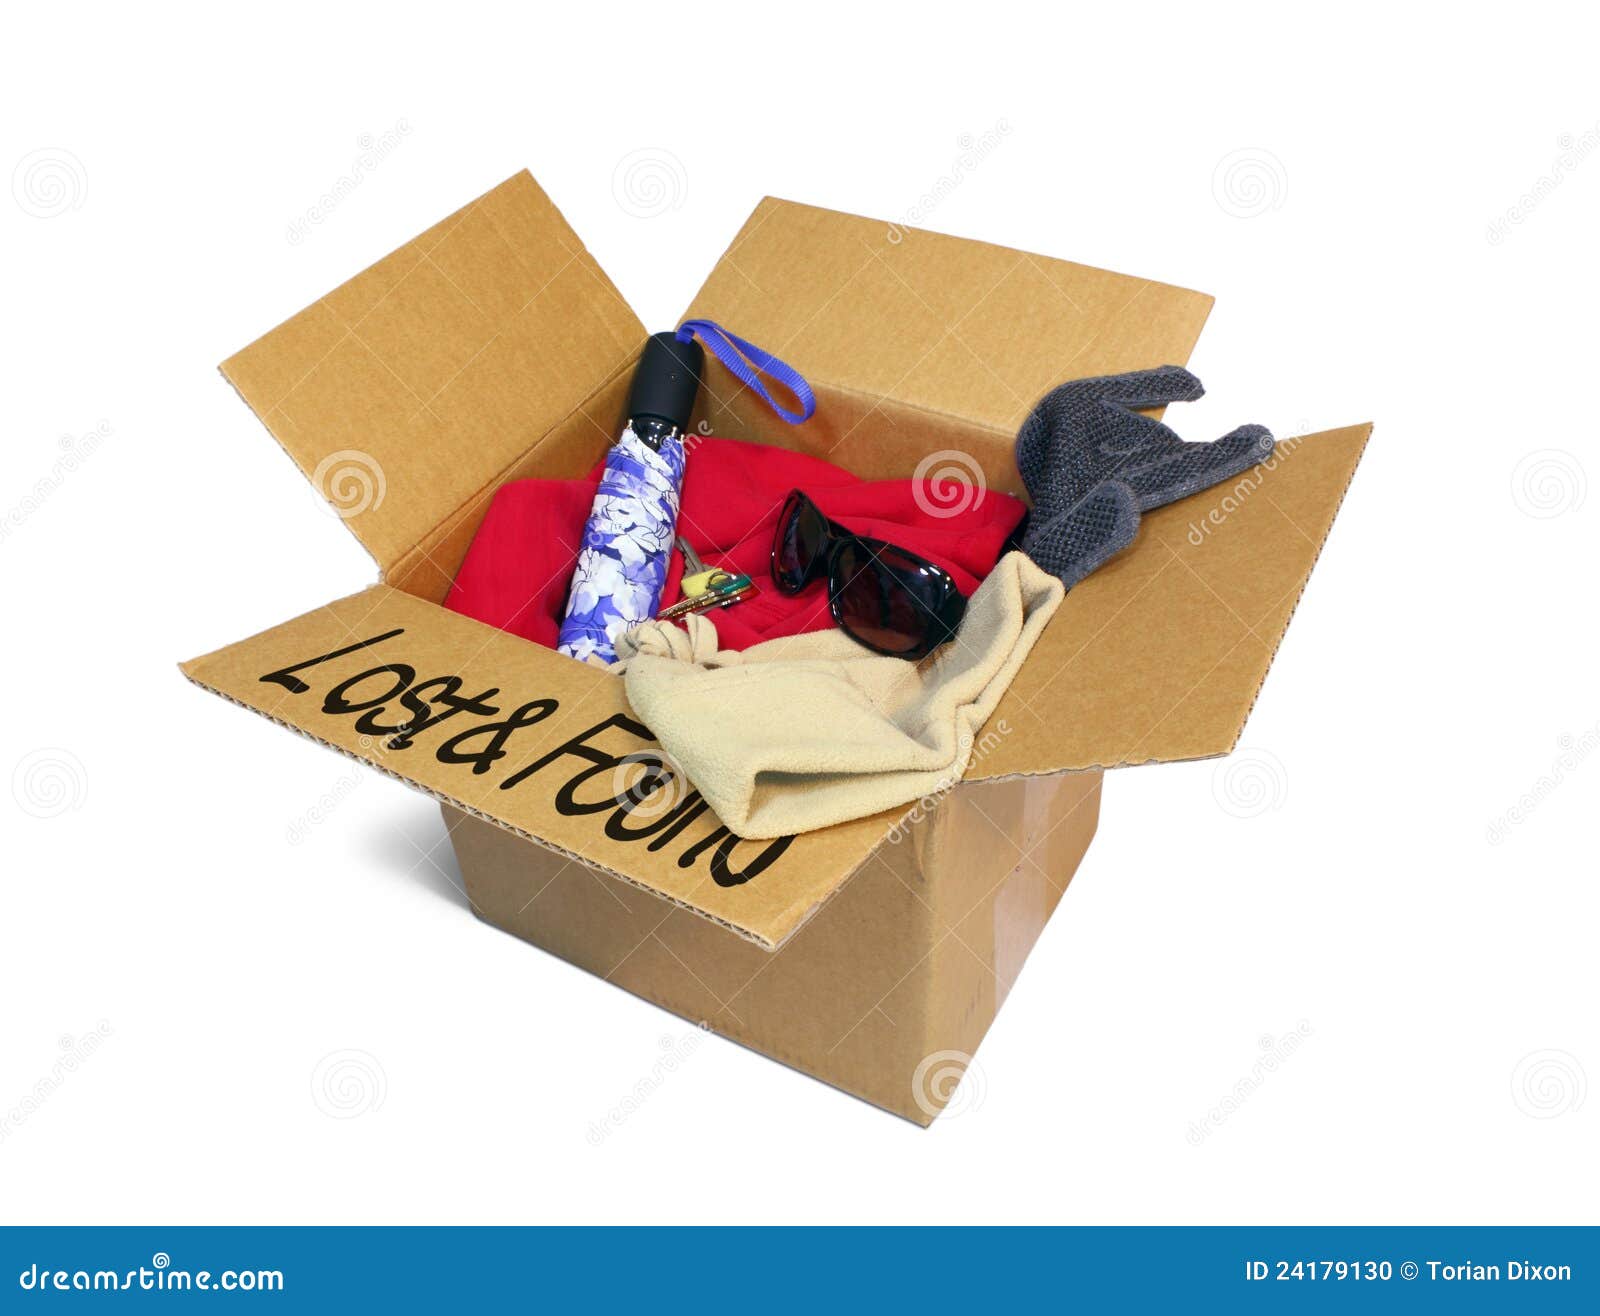 lost and found box